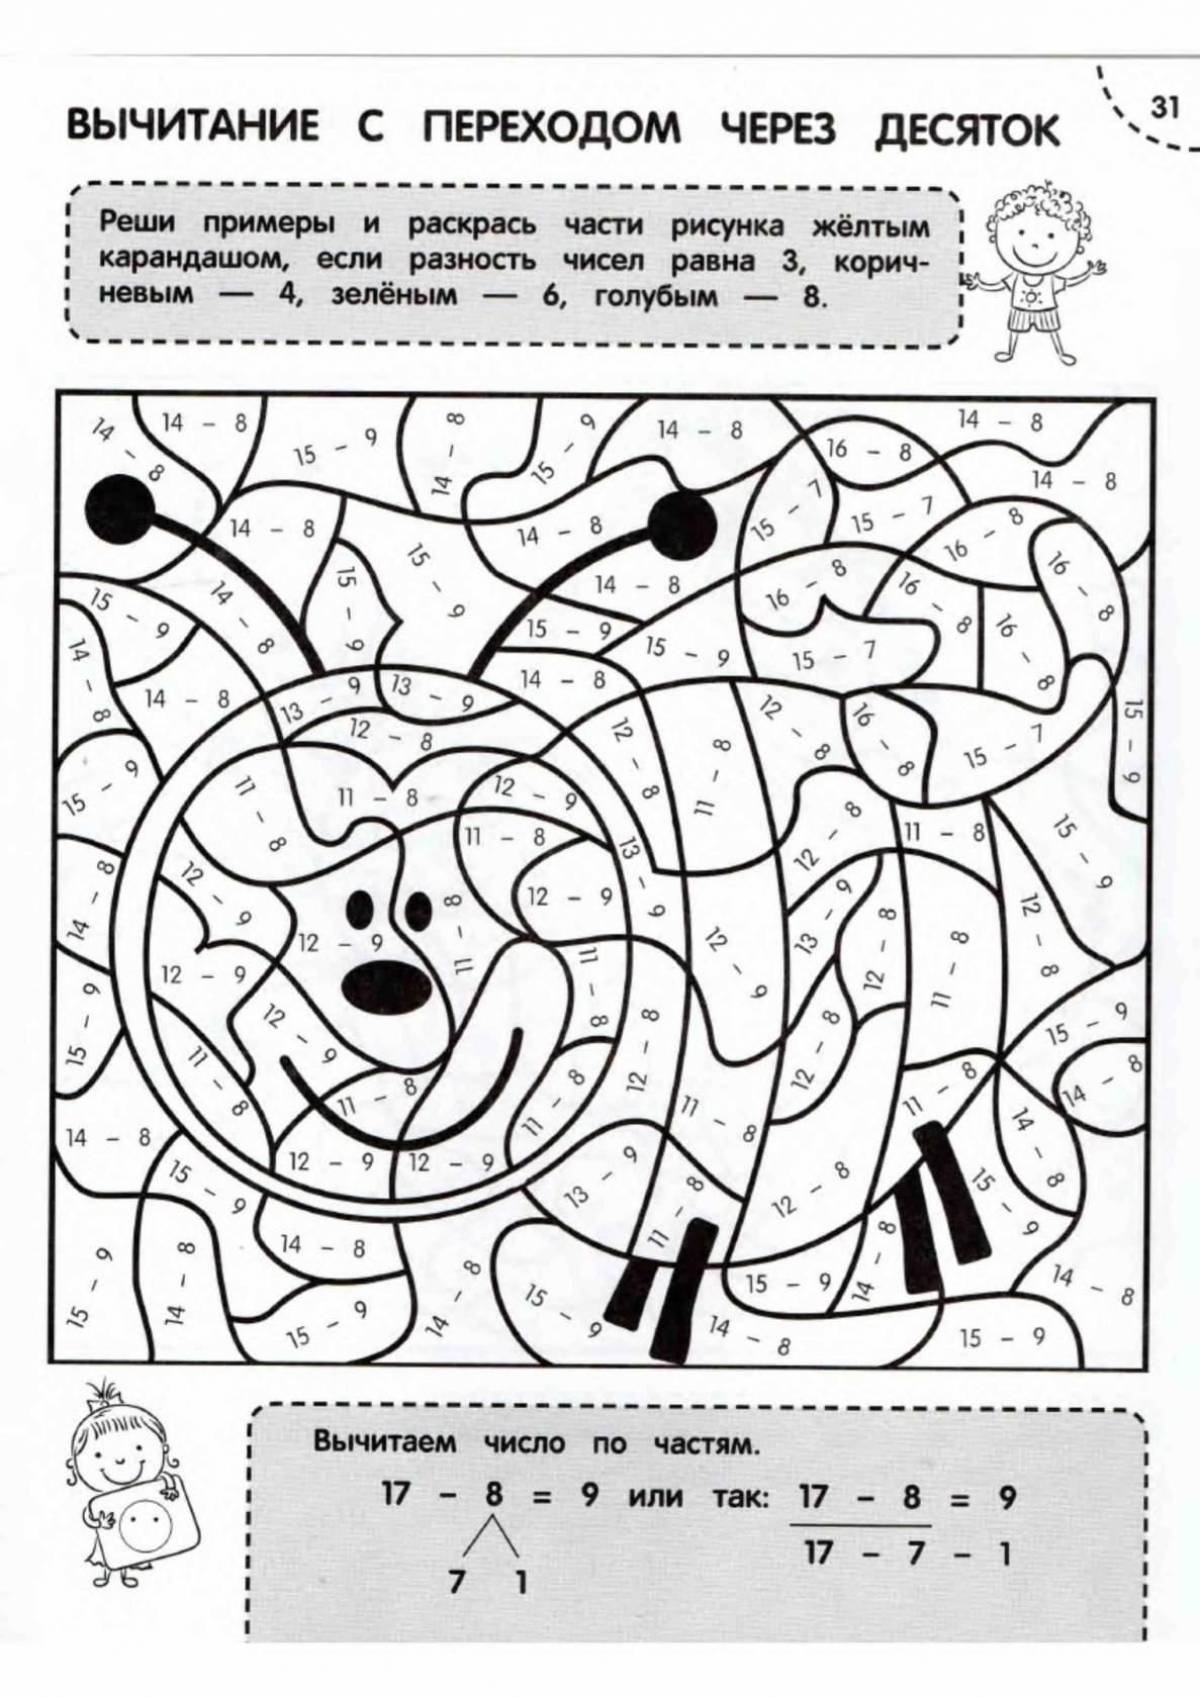 After a dozen and counting coloring pages with examples